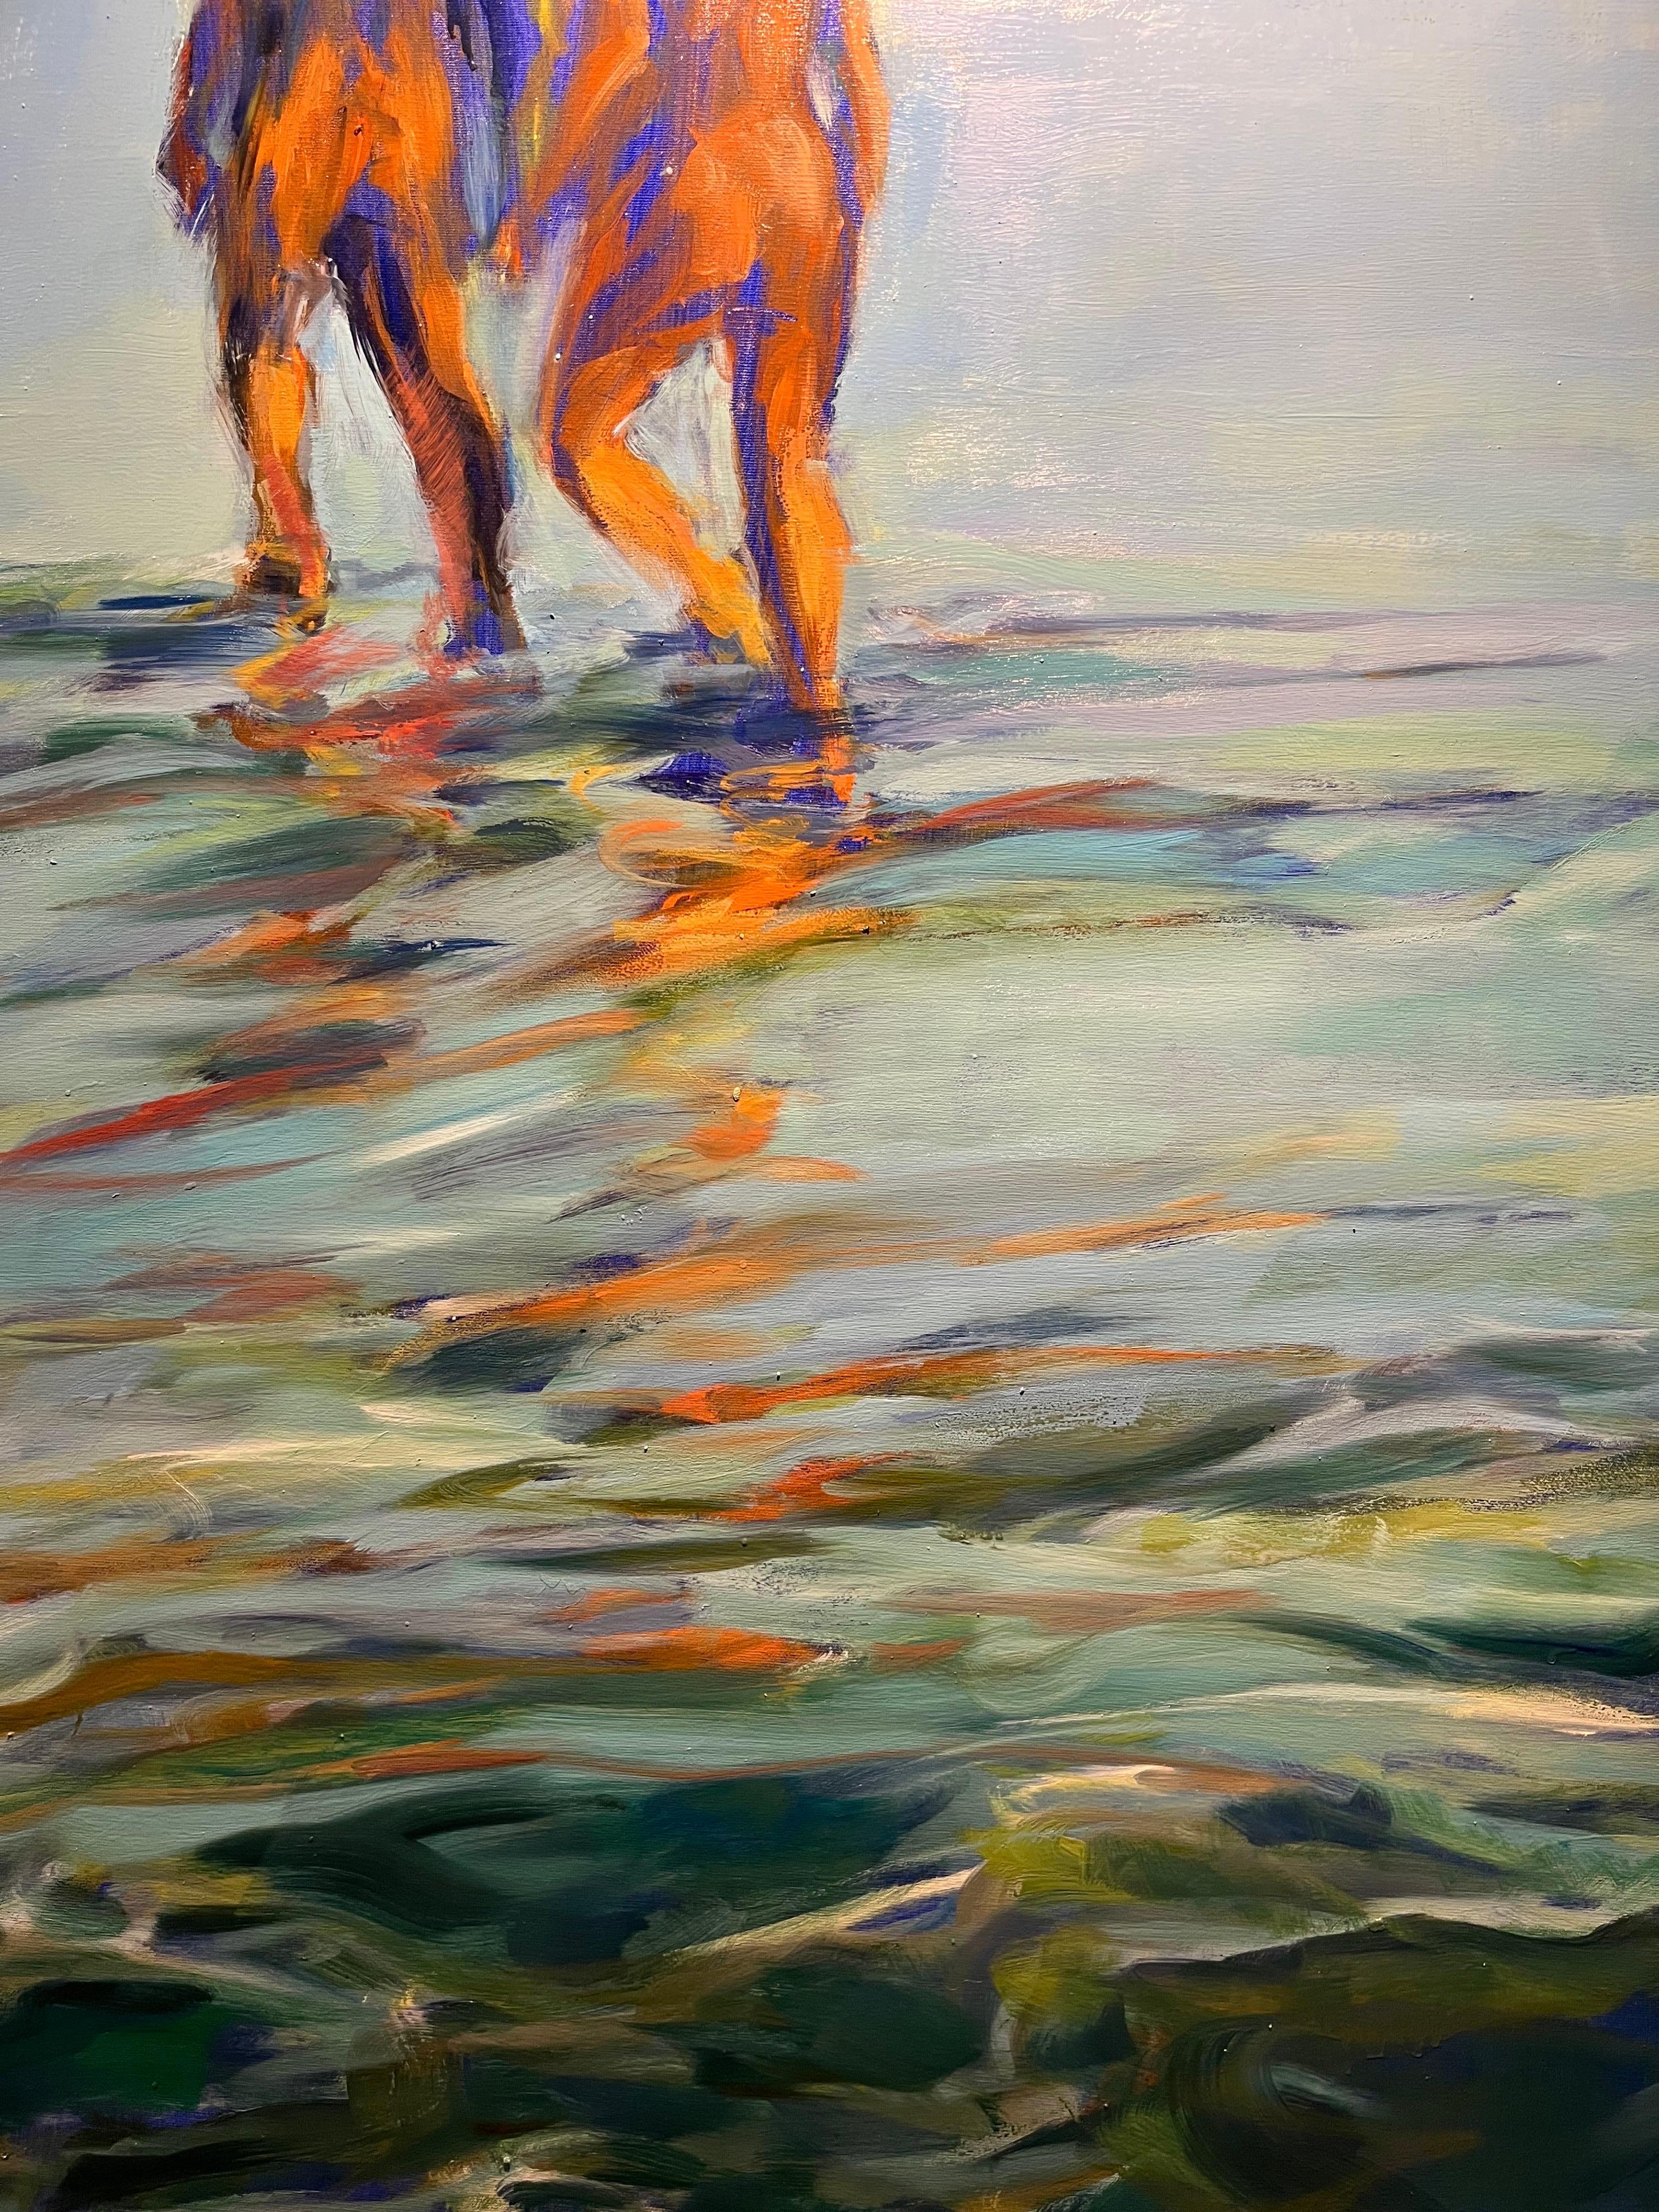 Water,Swimmer,Summer,sea

Birgitte LYKKE MADSEN (Odense, Denmark, 1960)

1981-86, Educated from the Academy of Fine Arts, Odense
First solo exhibition in 1983

Artist statement:

“I am a painter. I am fascinated by the difference in cold and warm